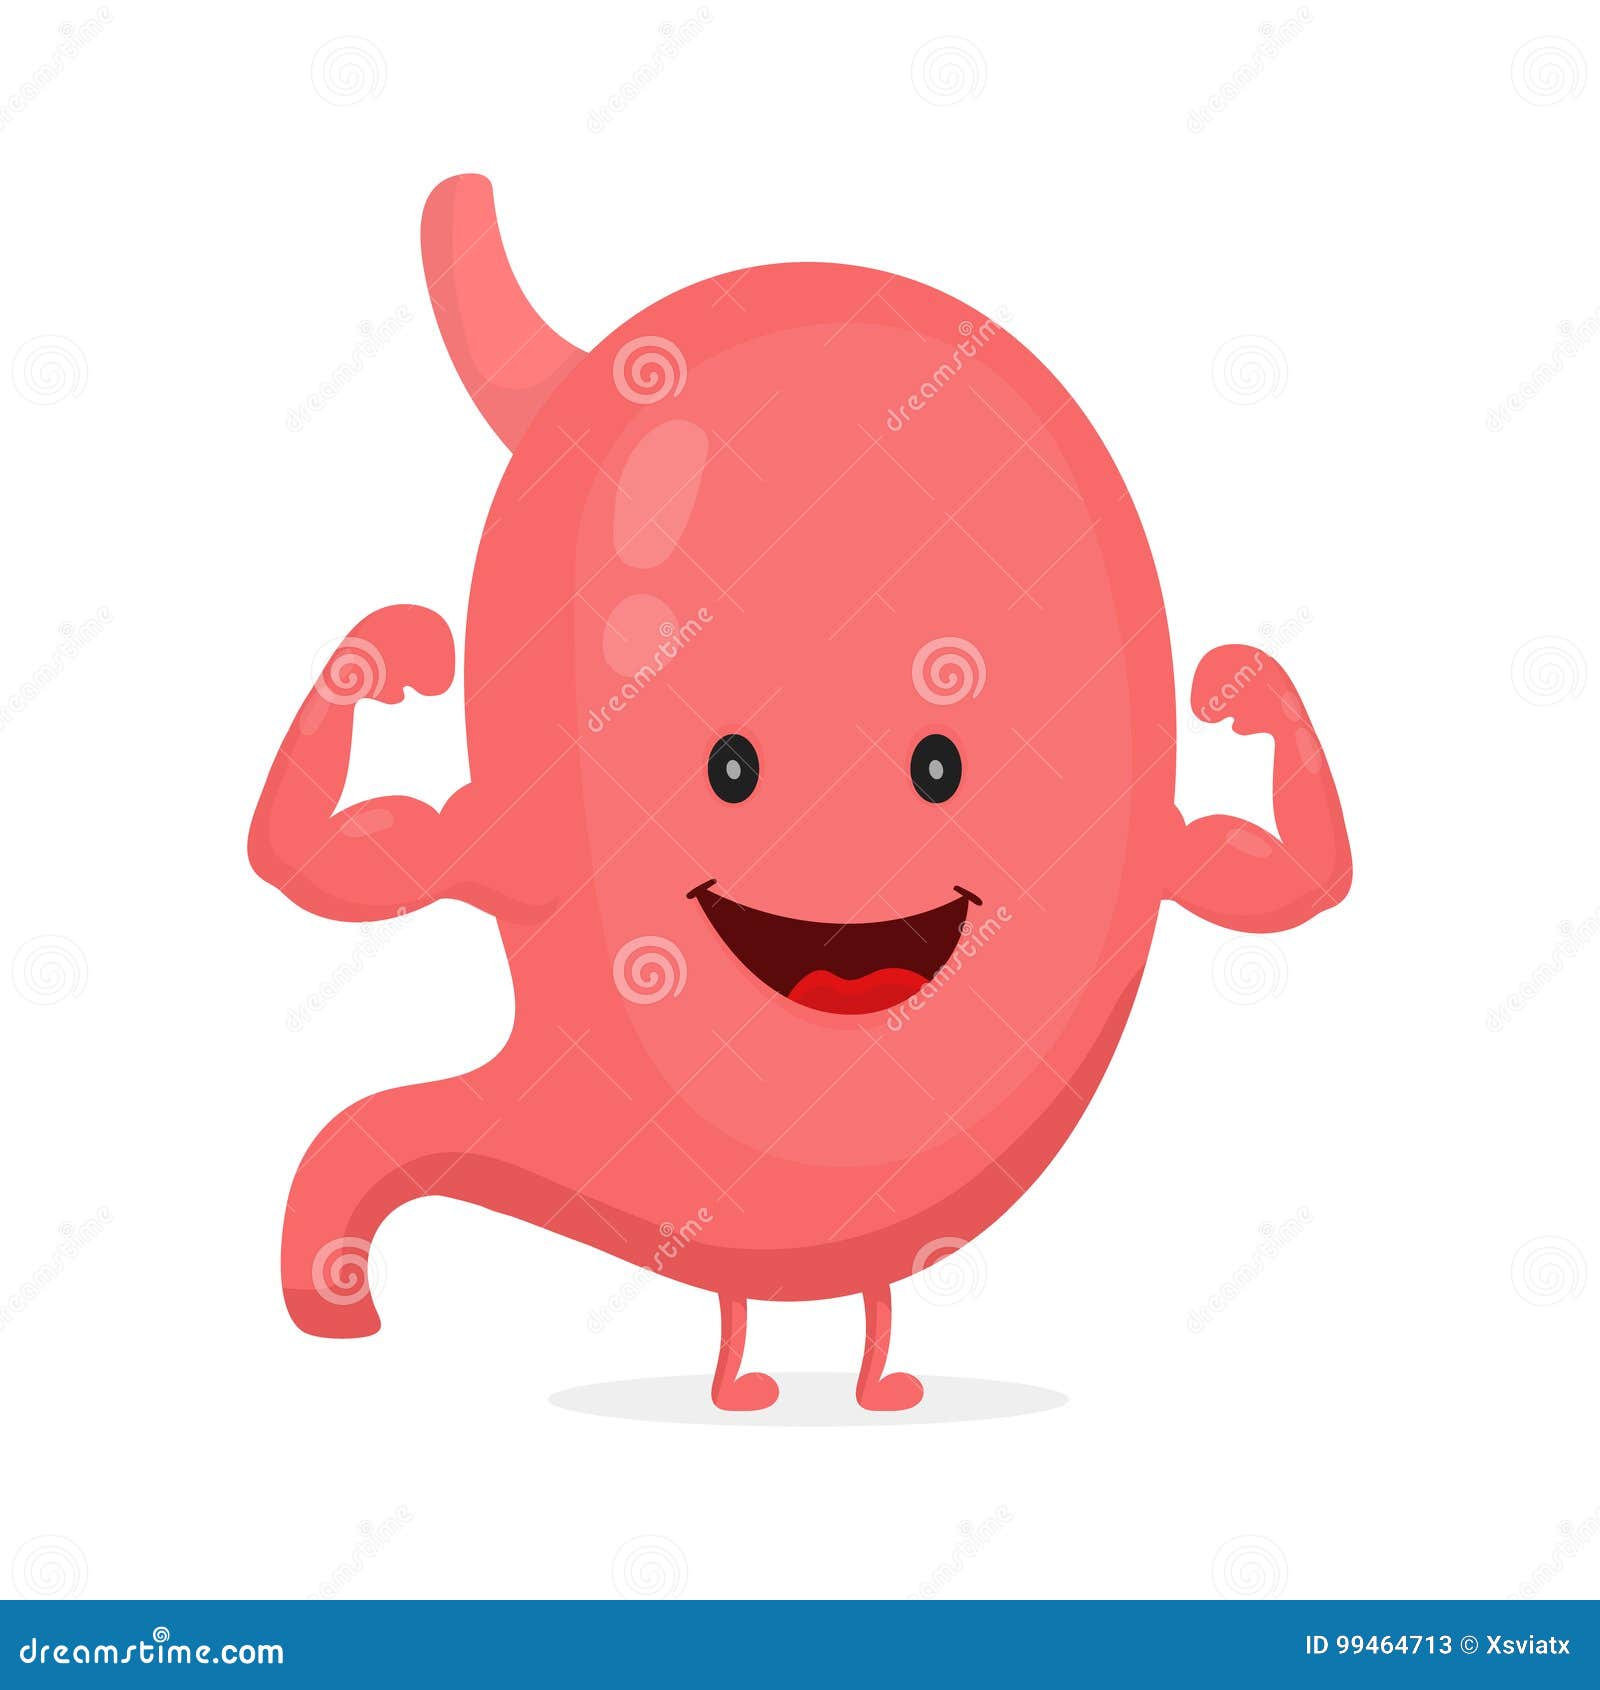 Strong Body Clipart - Clipart Suggest